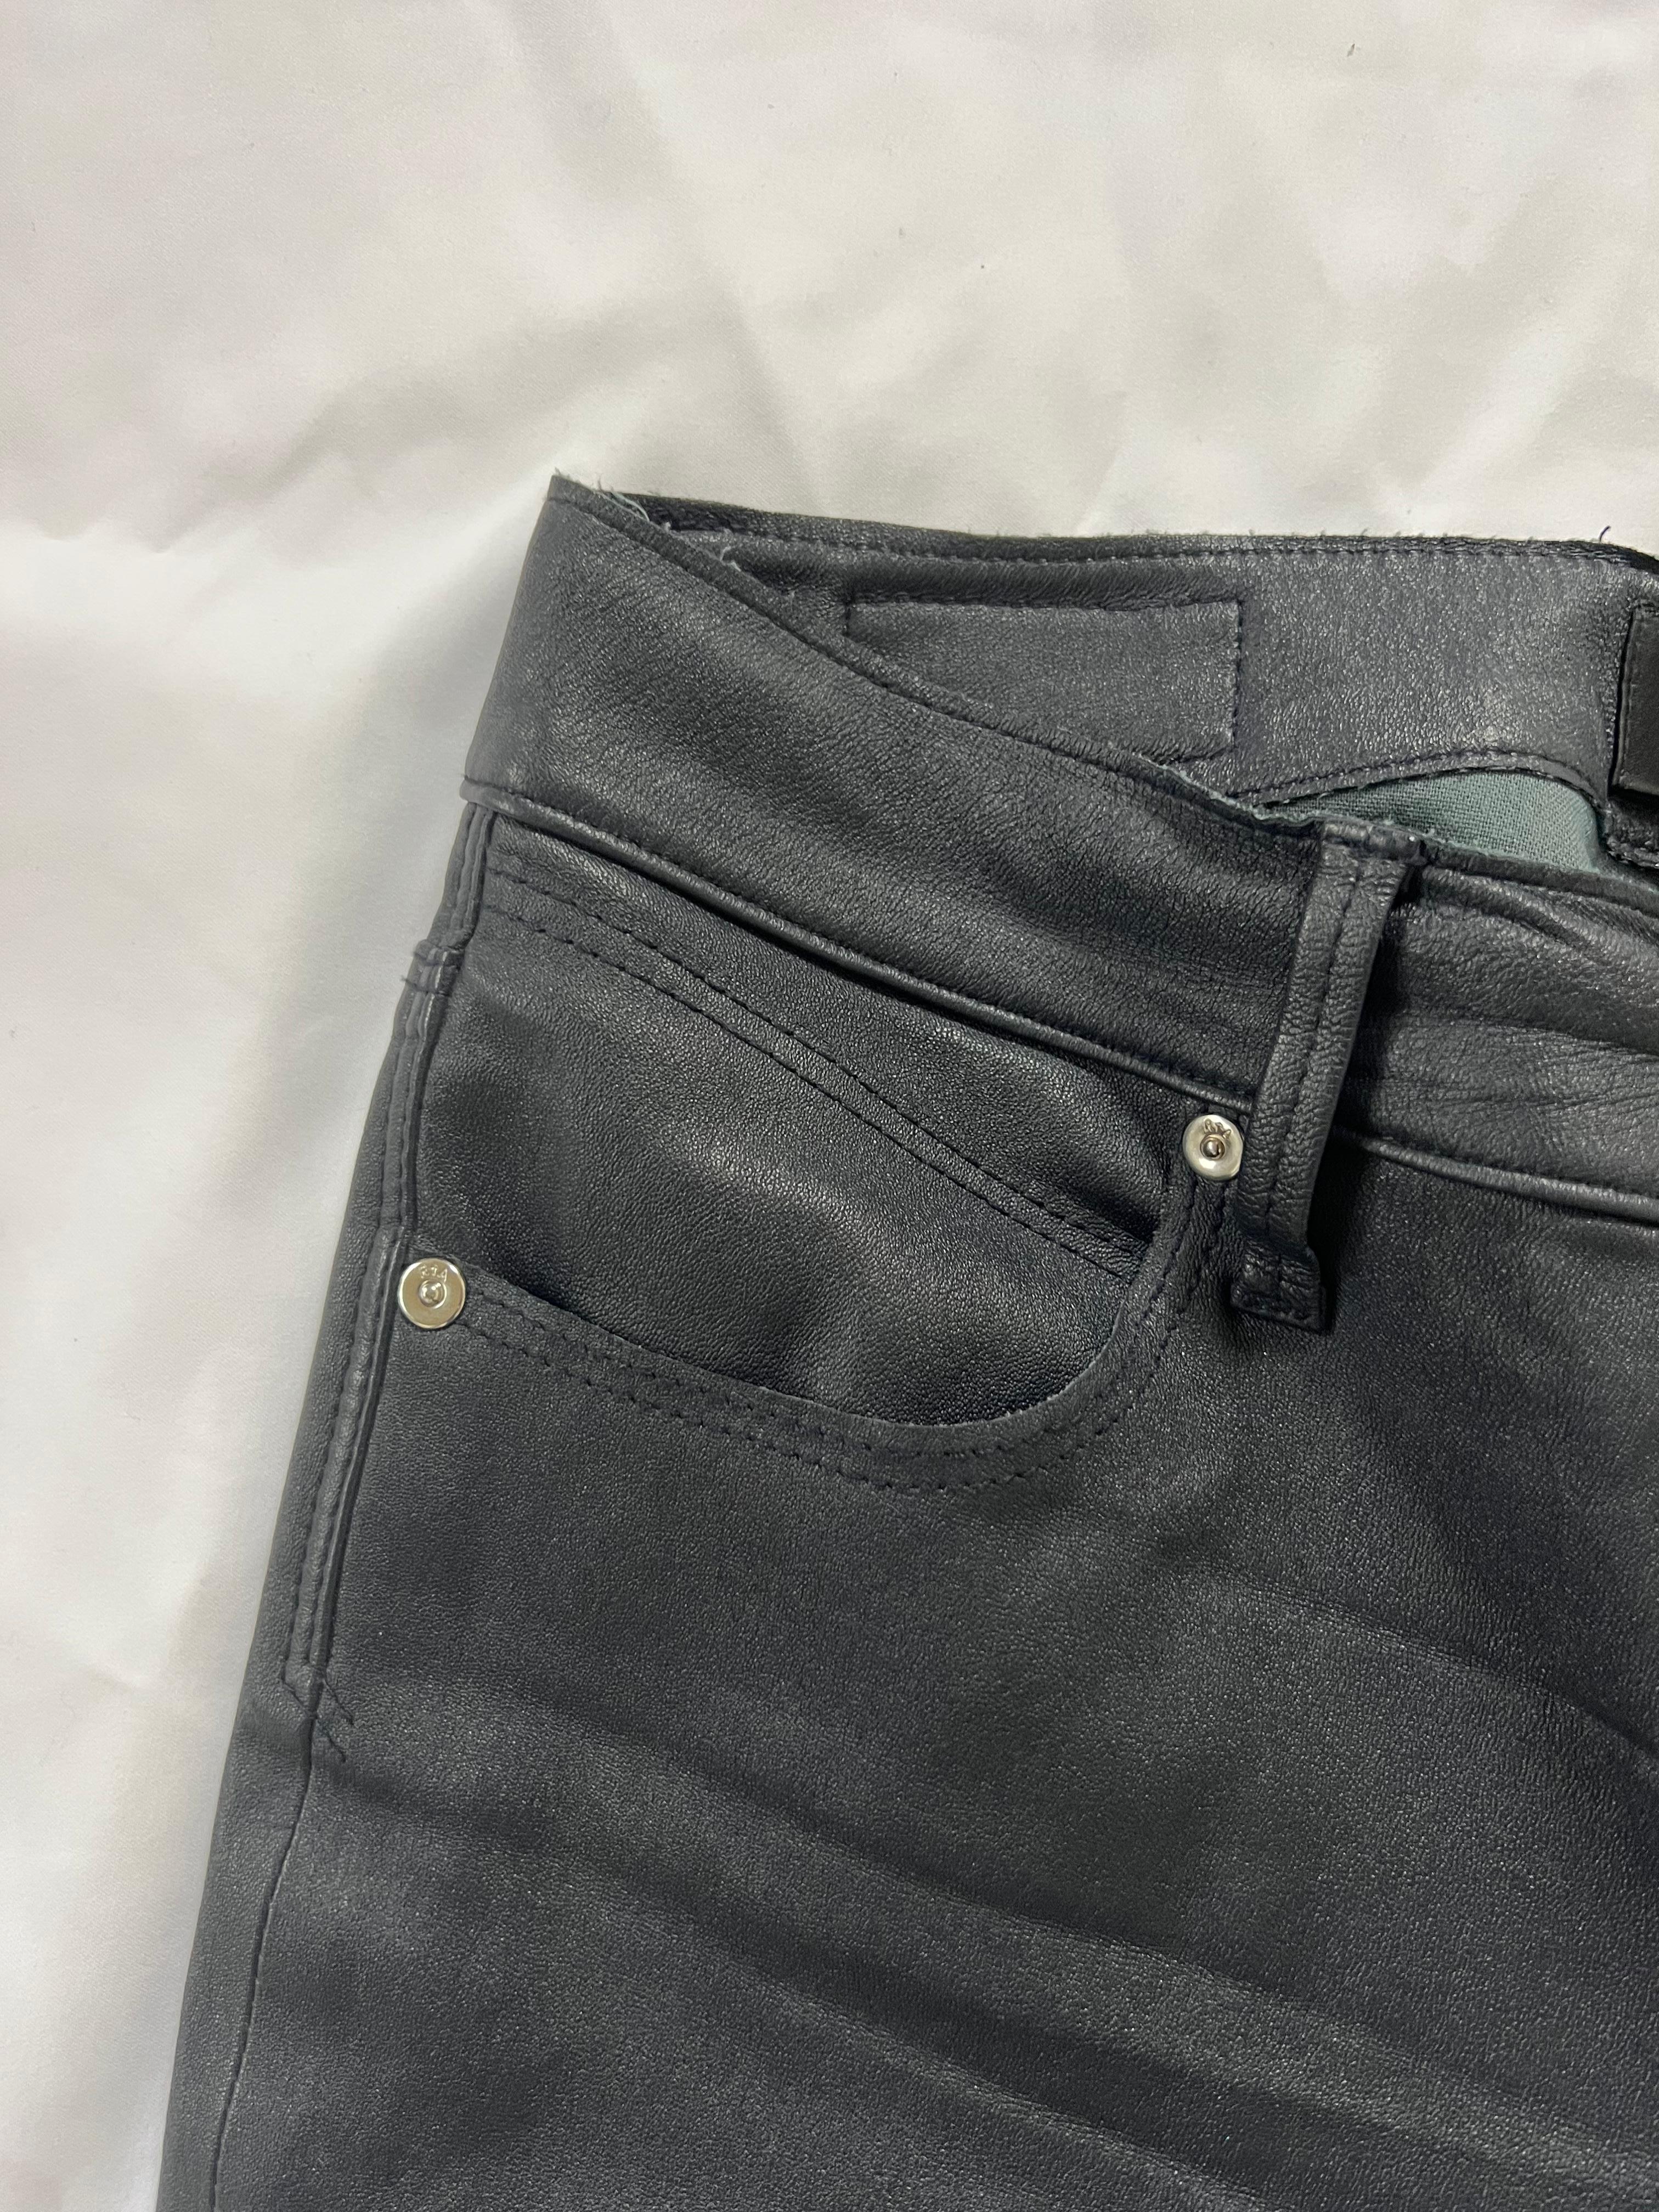 Women's RtA Navy Leather Pants, Size 27 For Sale